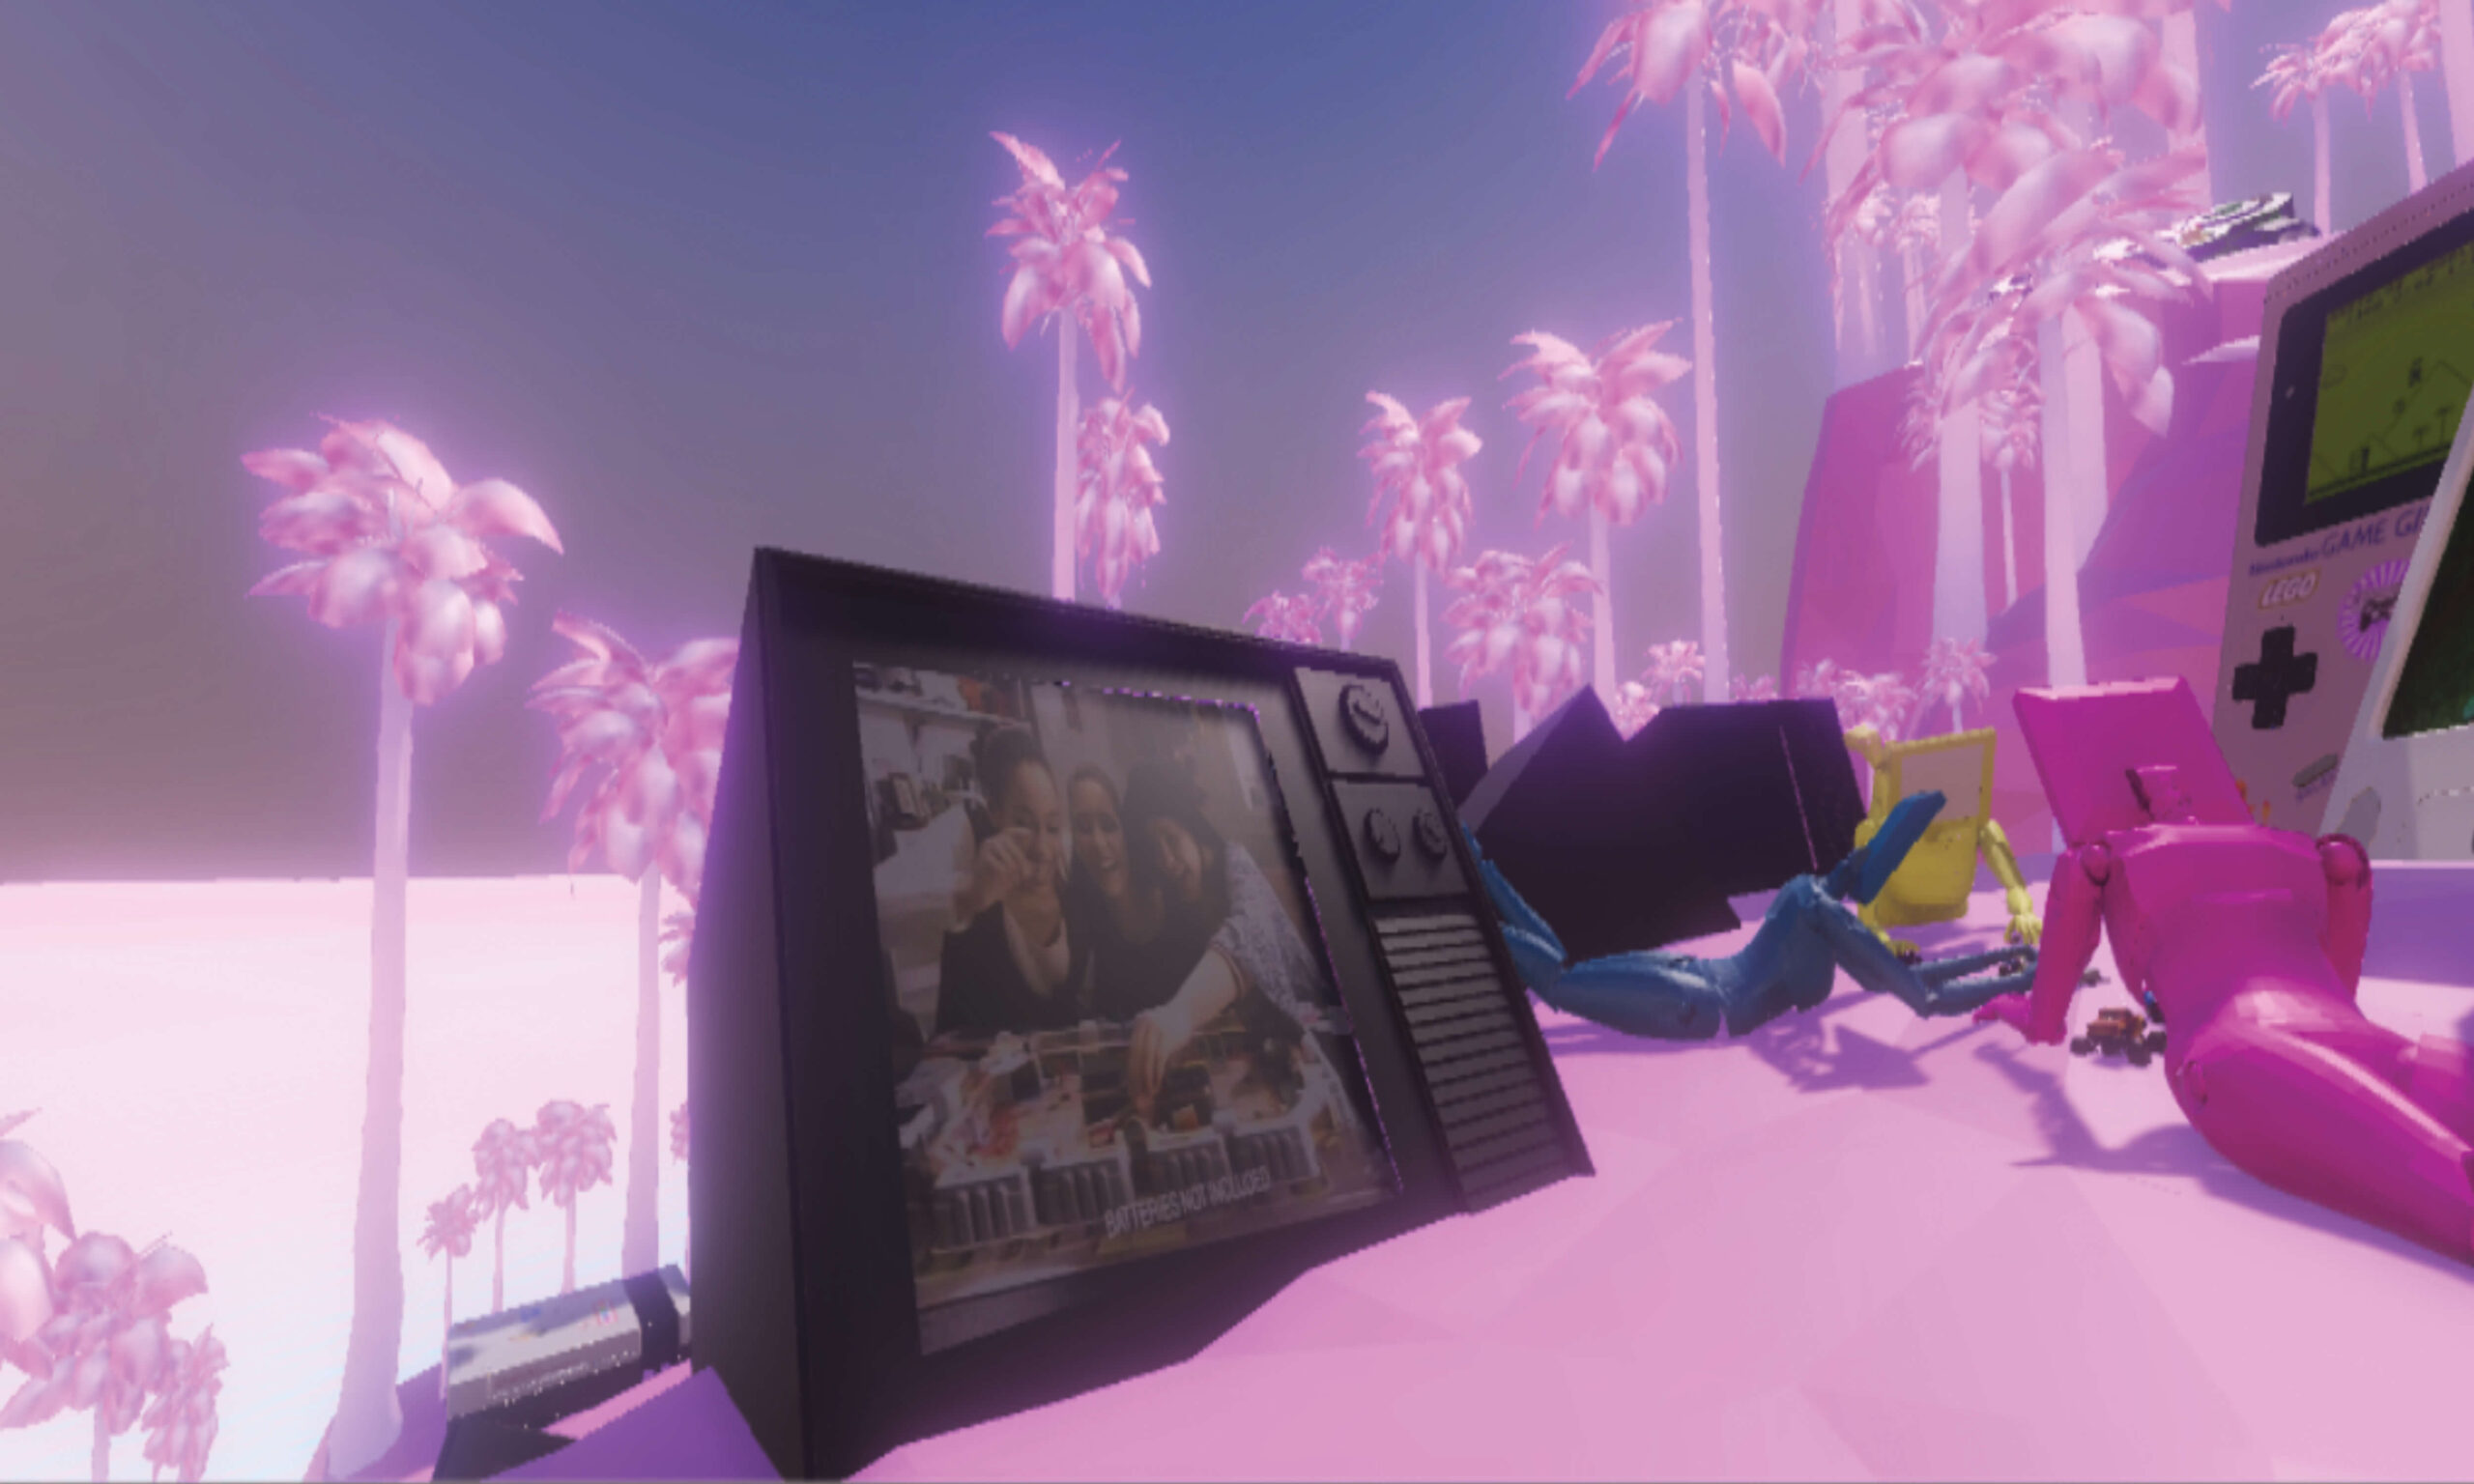 A 3D render of a TV screen laying on a pink mud-like substance with pink palm trees in the background.